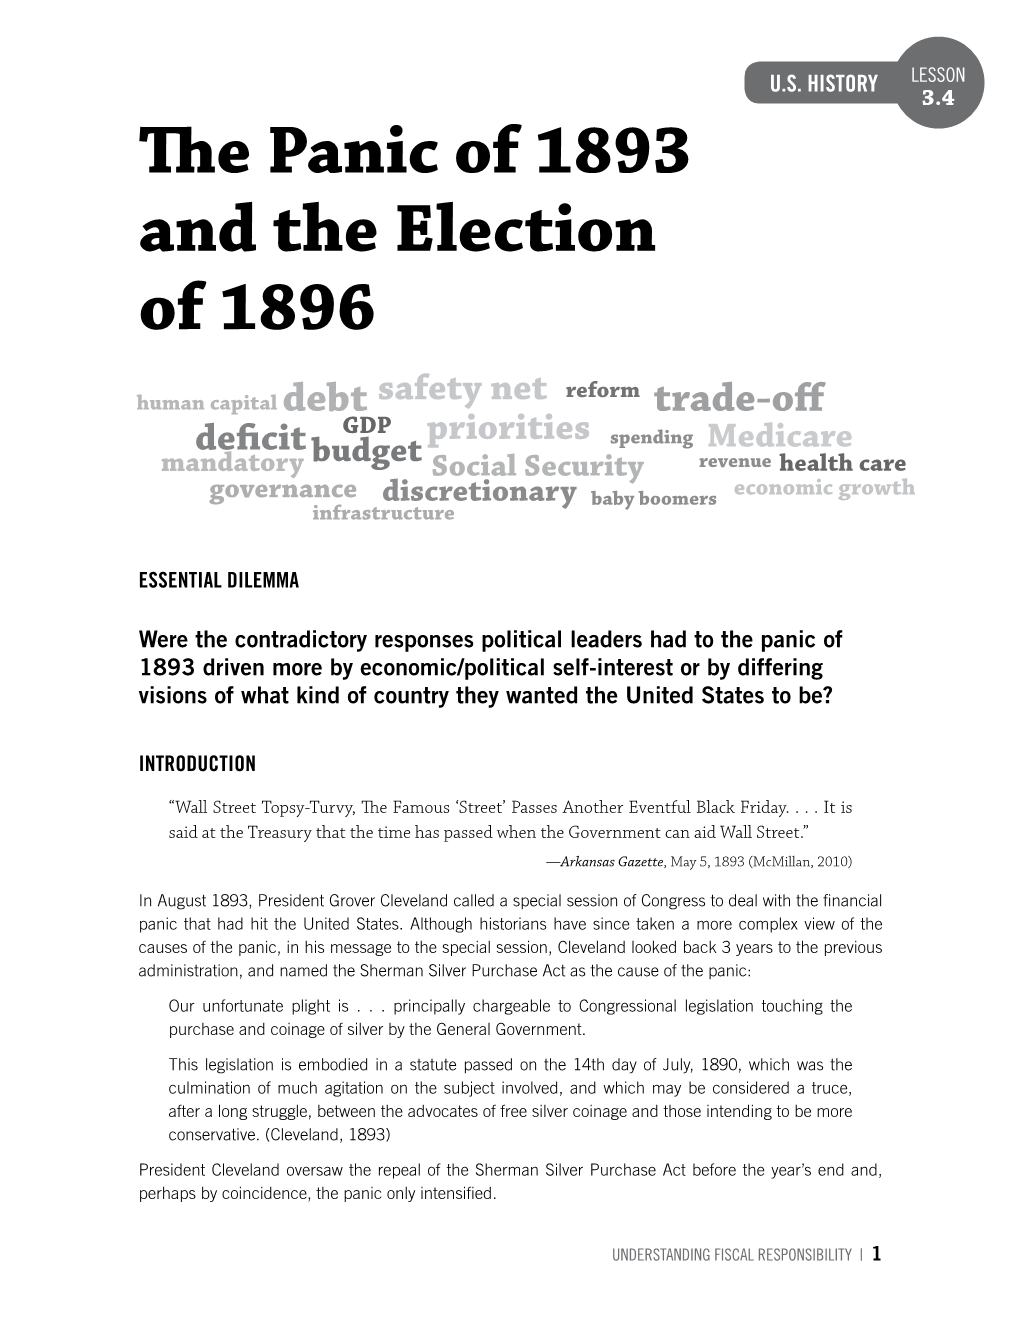 The Panic of 1893 and the Election of 1896